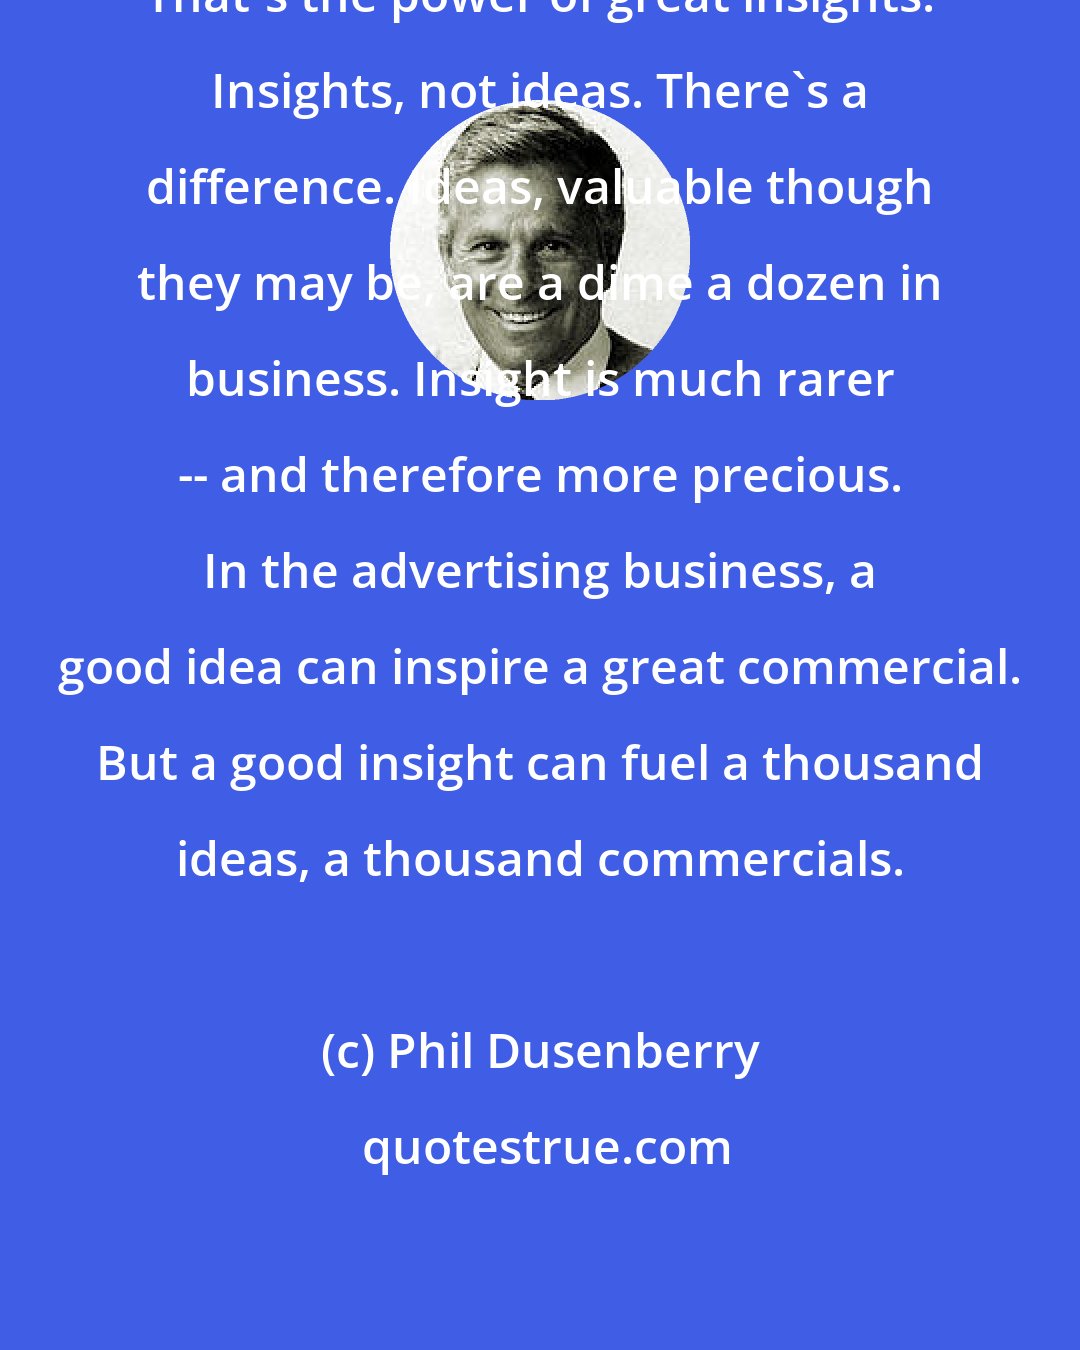 Phil Dusenberry: That's the power of great insights. Insights, not ideas. There's a difference. Ideas, valuable though they may be, are a dime a dozen in business. Insight is much rarer -- and therefore more precious. In the advertising business, a good idea can inspire a great commercial. But a good insight can fuel a thousand ideas, a thousand commercials.